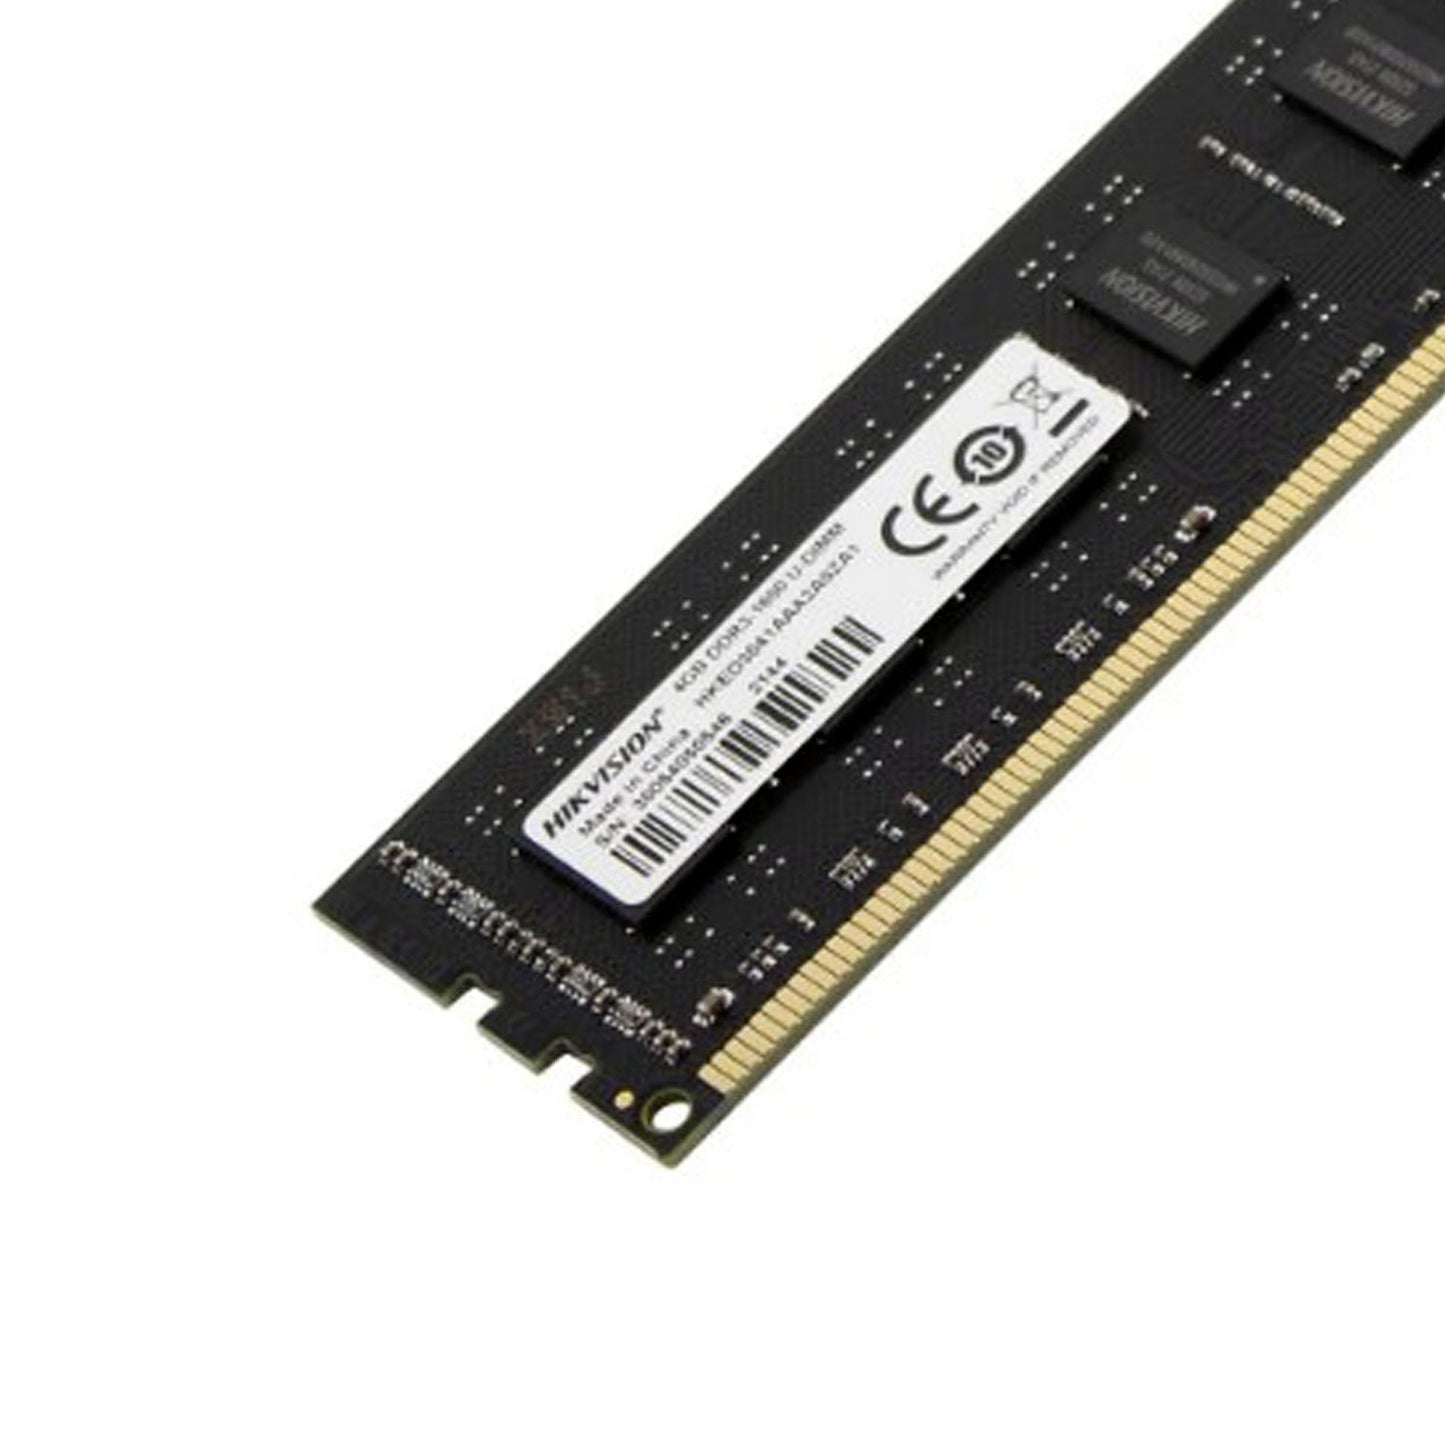 Memoria Ram DDR3 1600 MHZ 4GB HKED3041AAA2A0ZA1 Hikvision